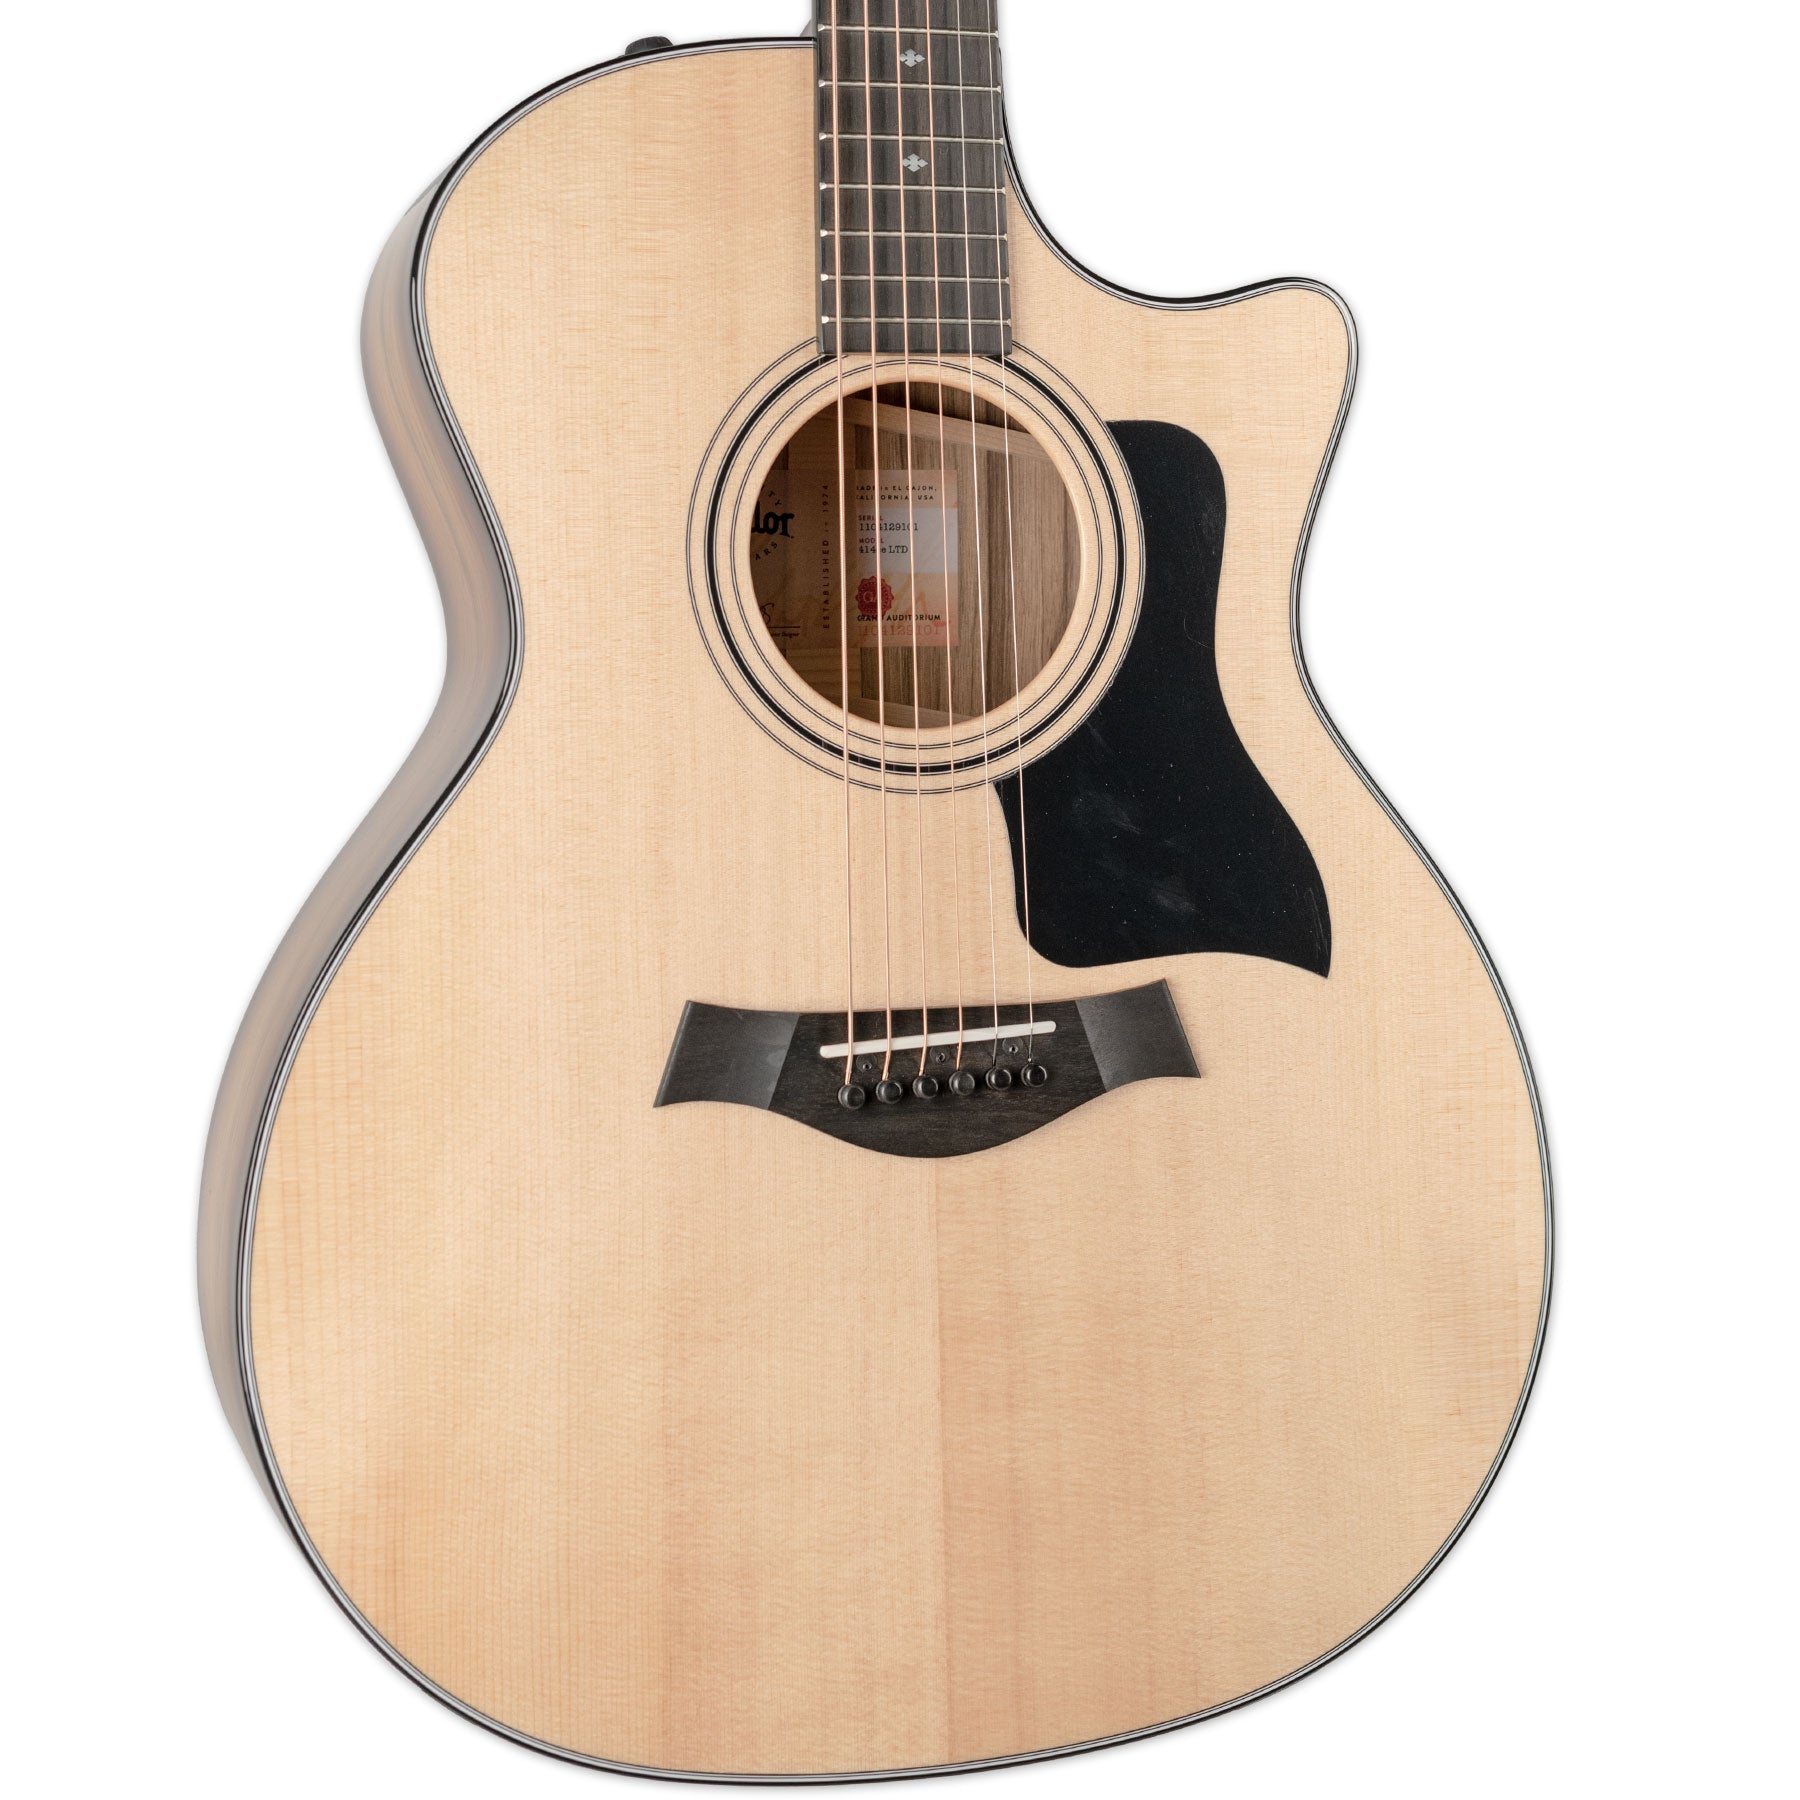 TAYLOR 414CE LTD ACOUSTIC ELECTRIC BLACK LIMBA BACK AND SIDES SHADED EDGE BURST